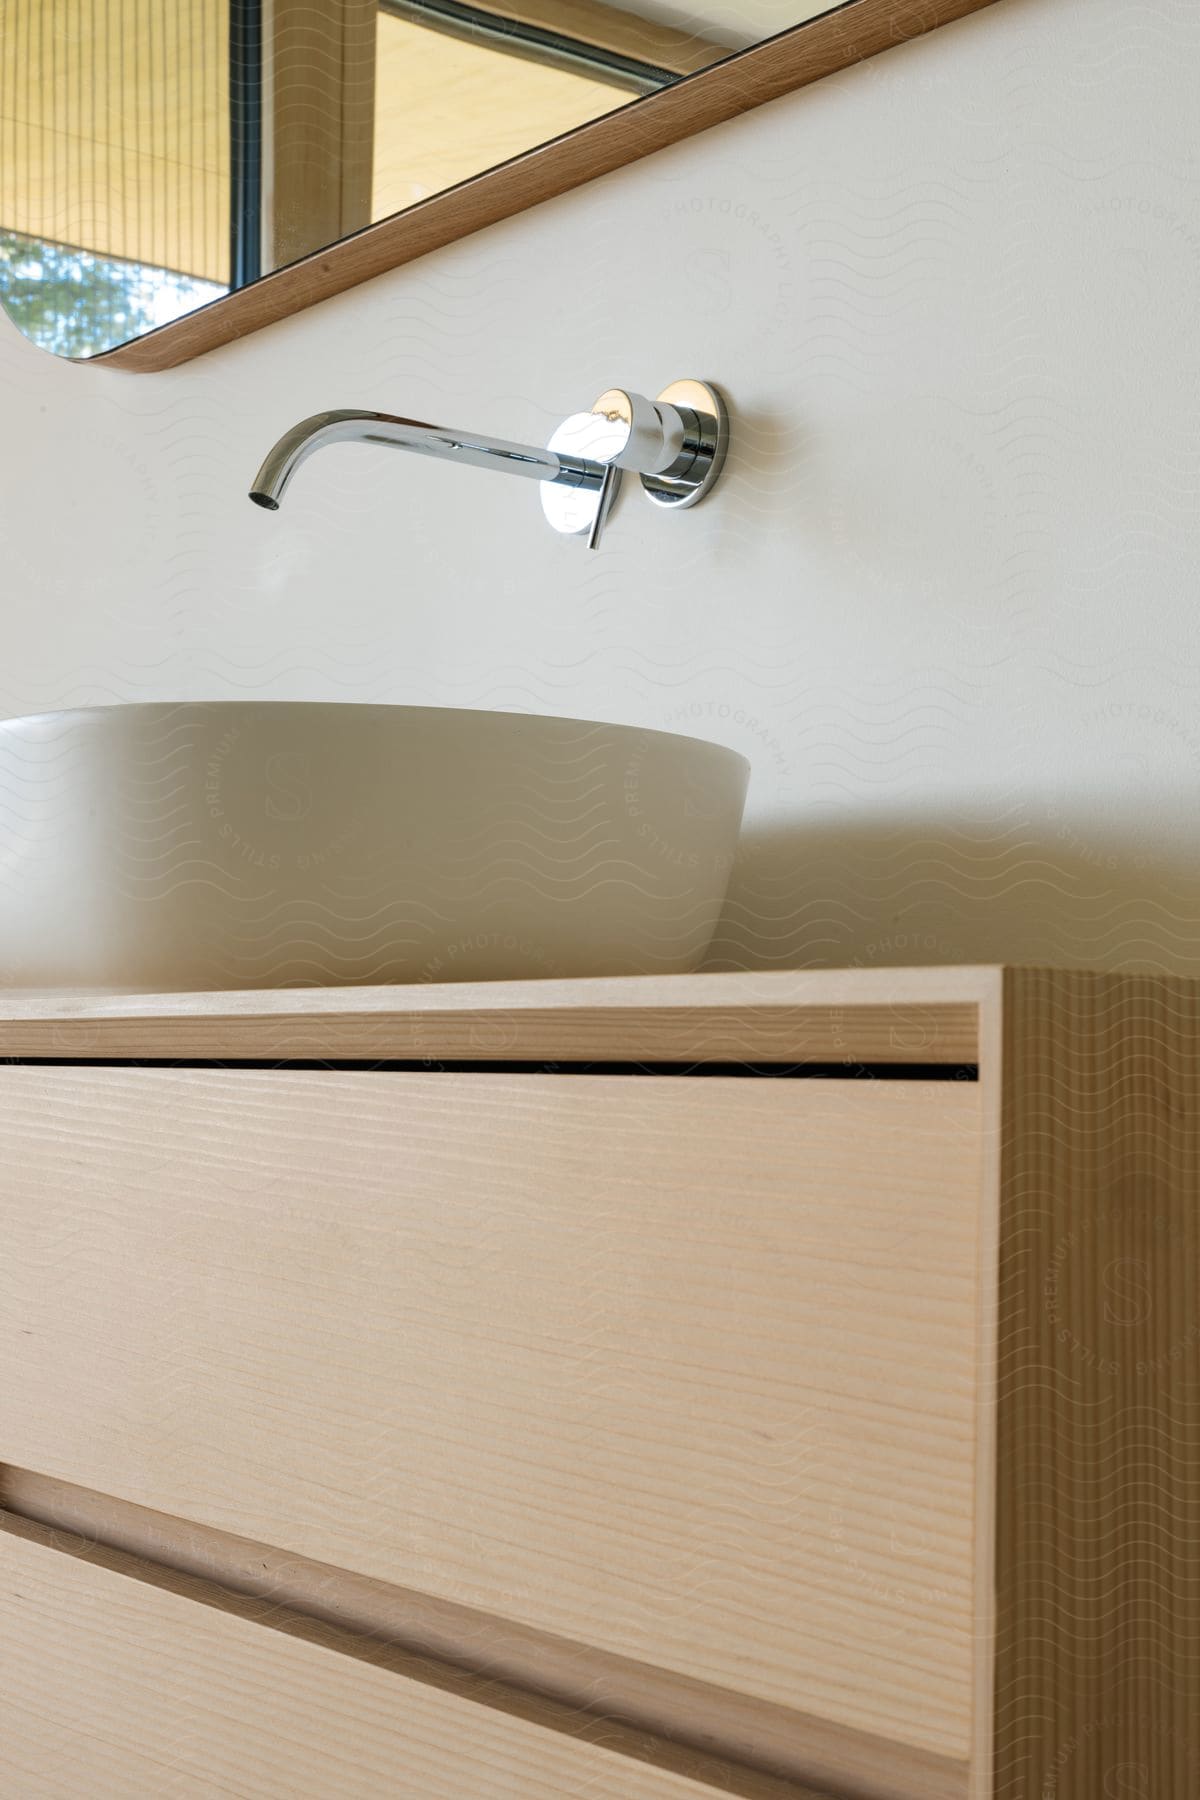 A bathroom bowl sink on top of a wood vanity with a faucet coming out of the wall